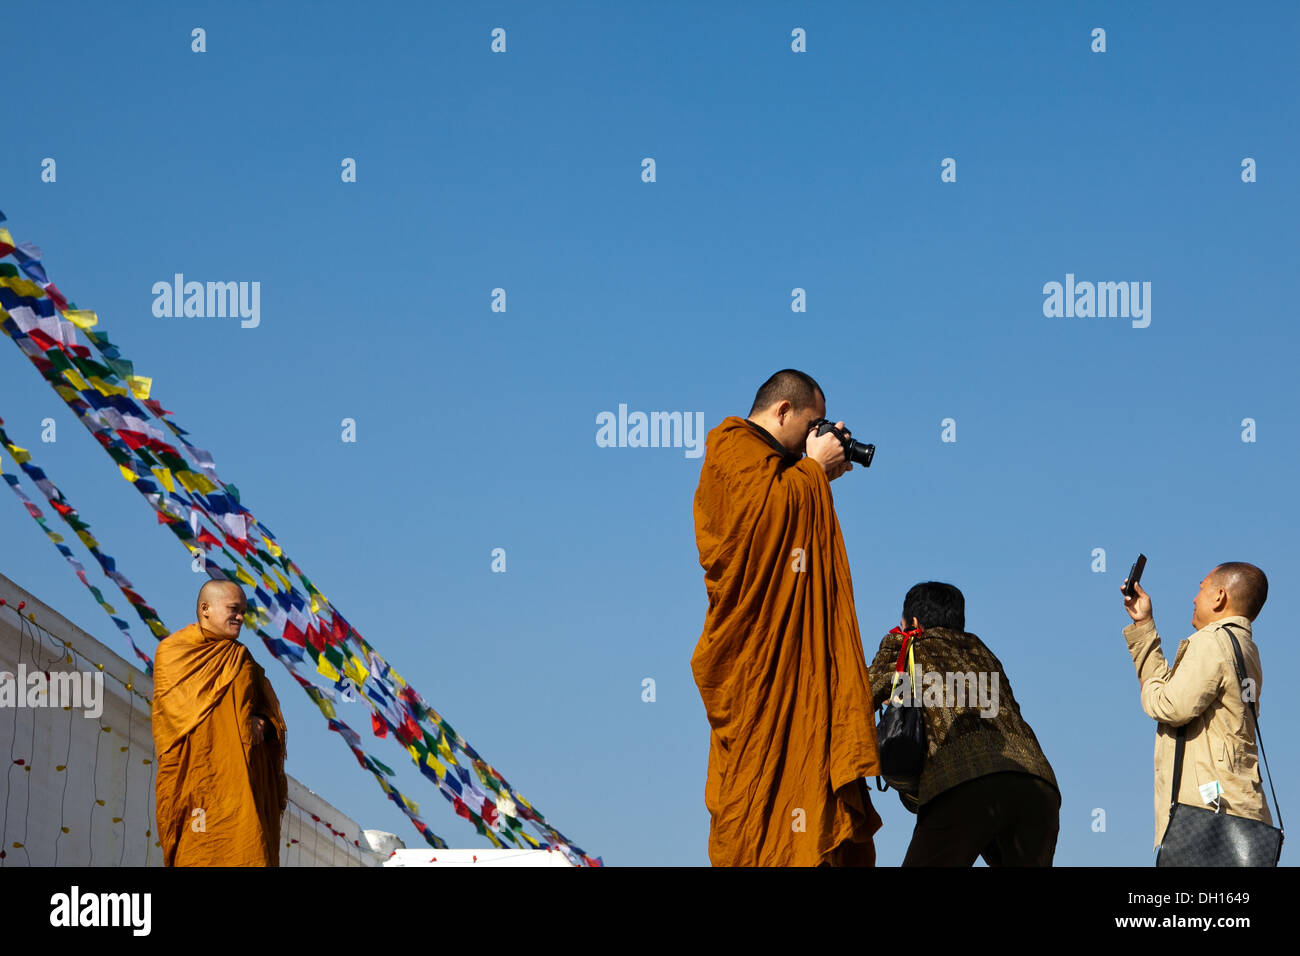 Monks and tourists with cameras Bodhanath / Bodnath Buddhist temple Kathmandu Nepal - juxtaposition of religion and technology Stock Photo